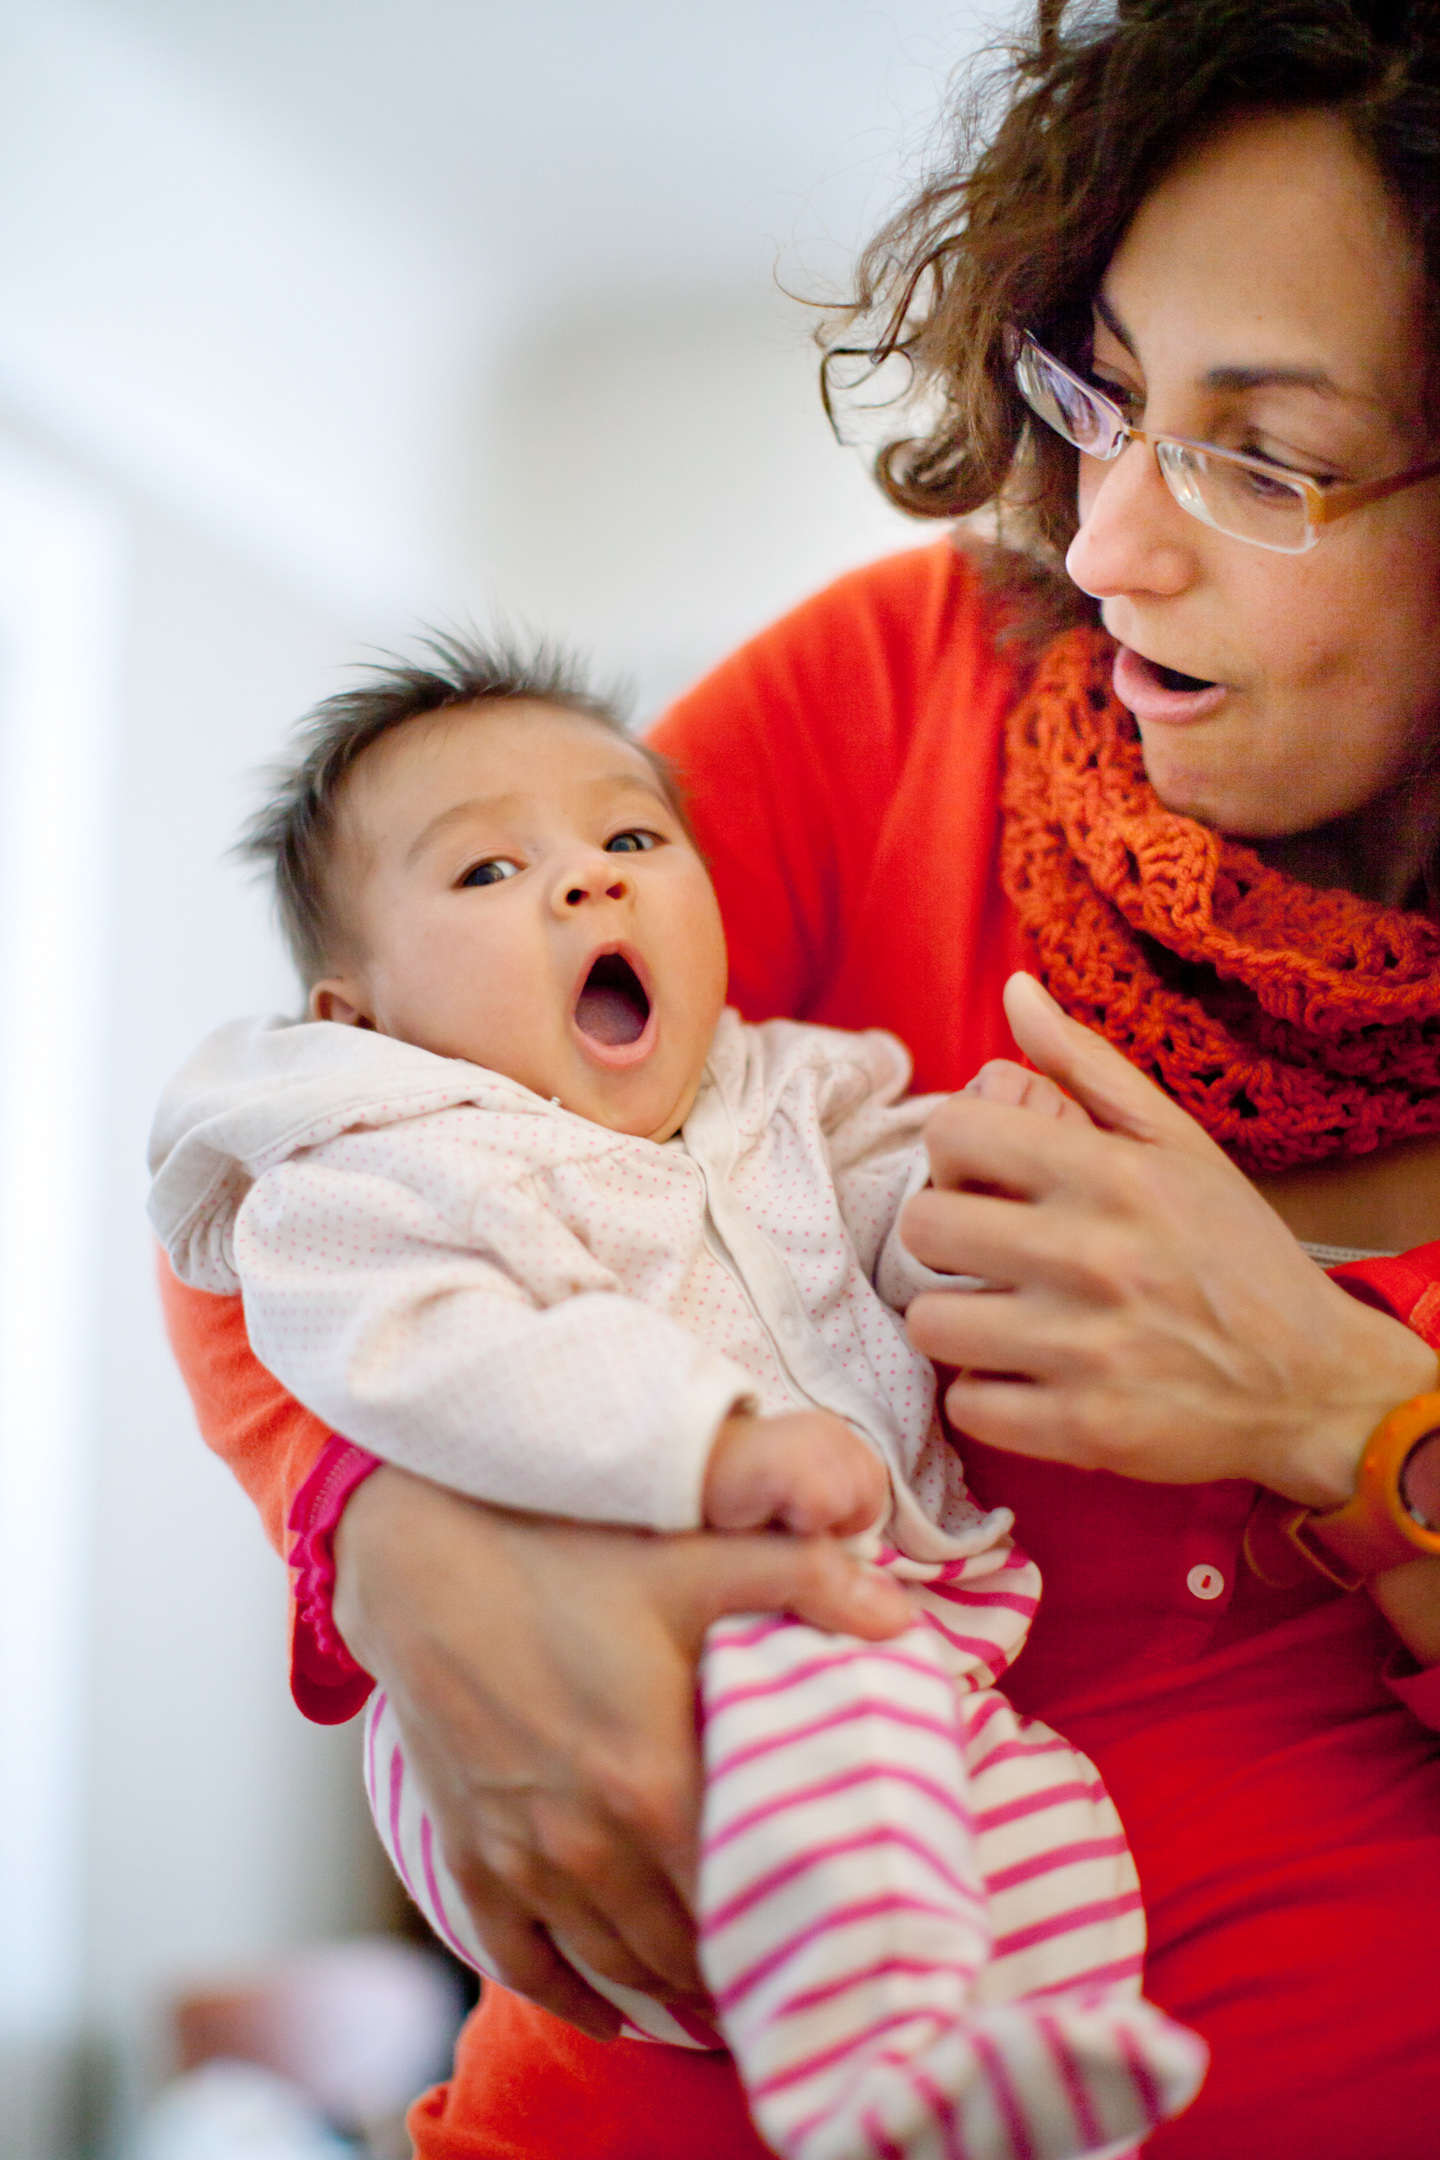 A woman holds her yawning infant daughter